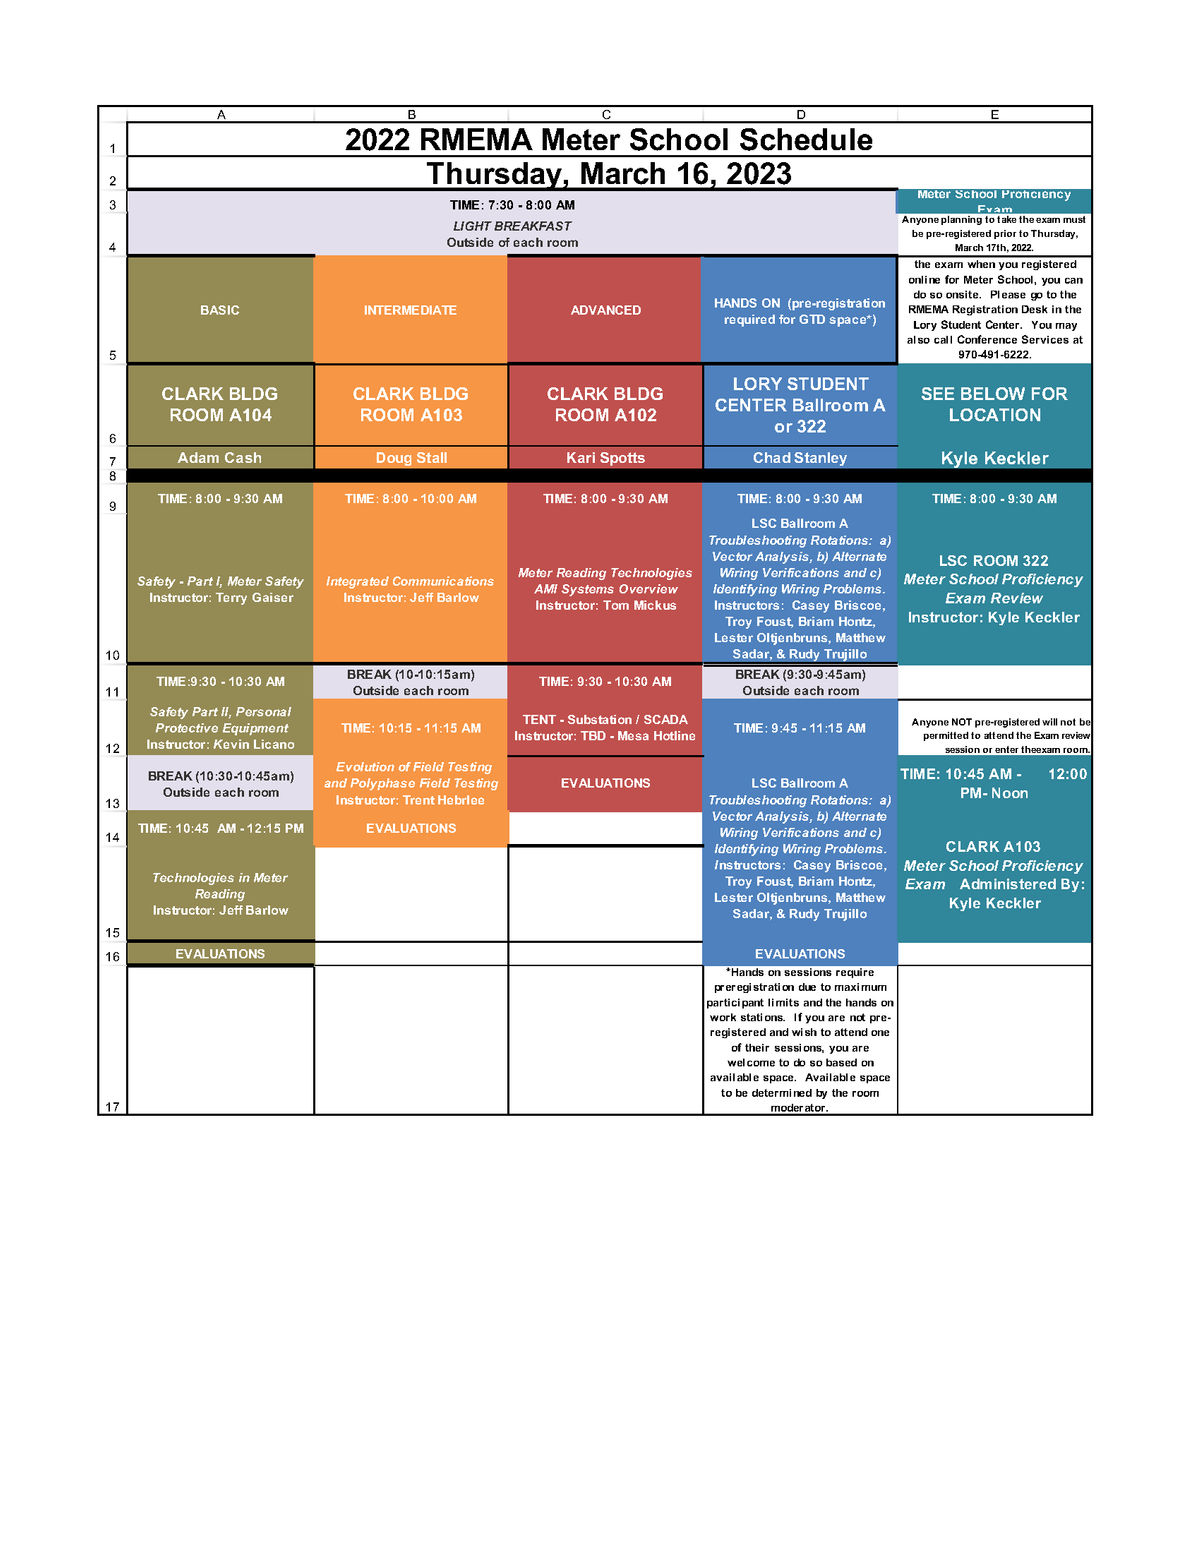 RMEMA 2023 Schedule at a glance - Thursday 3.16.23.png